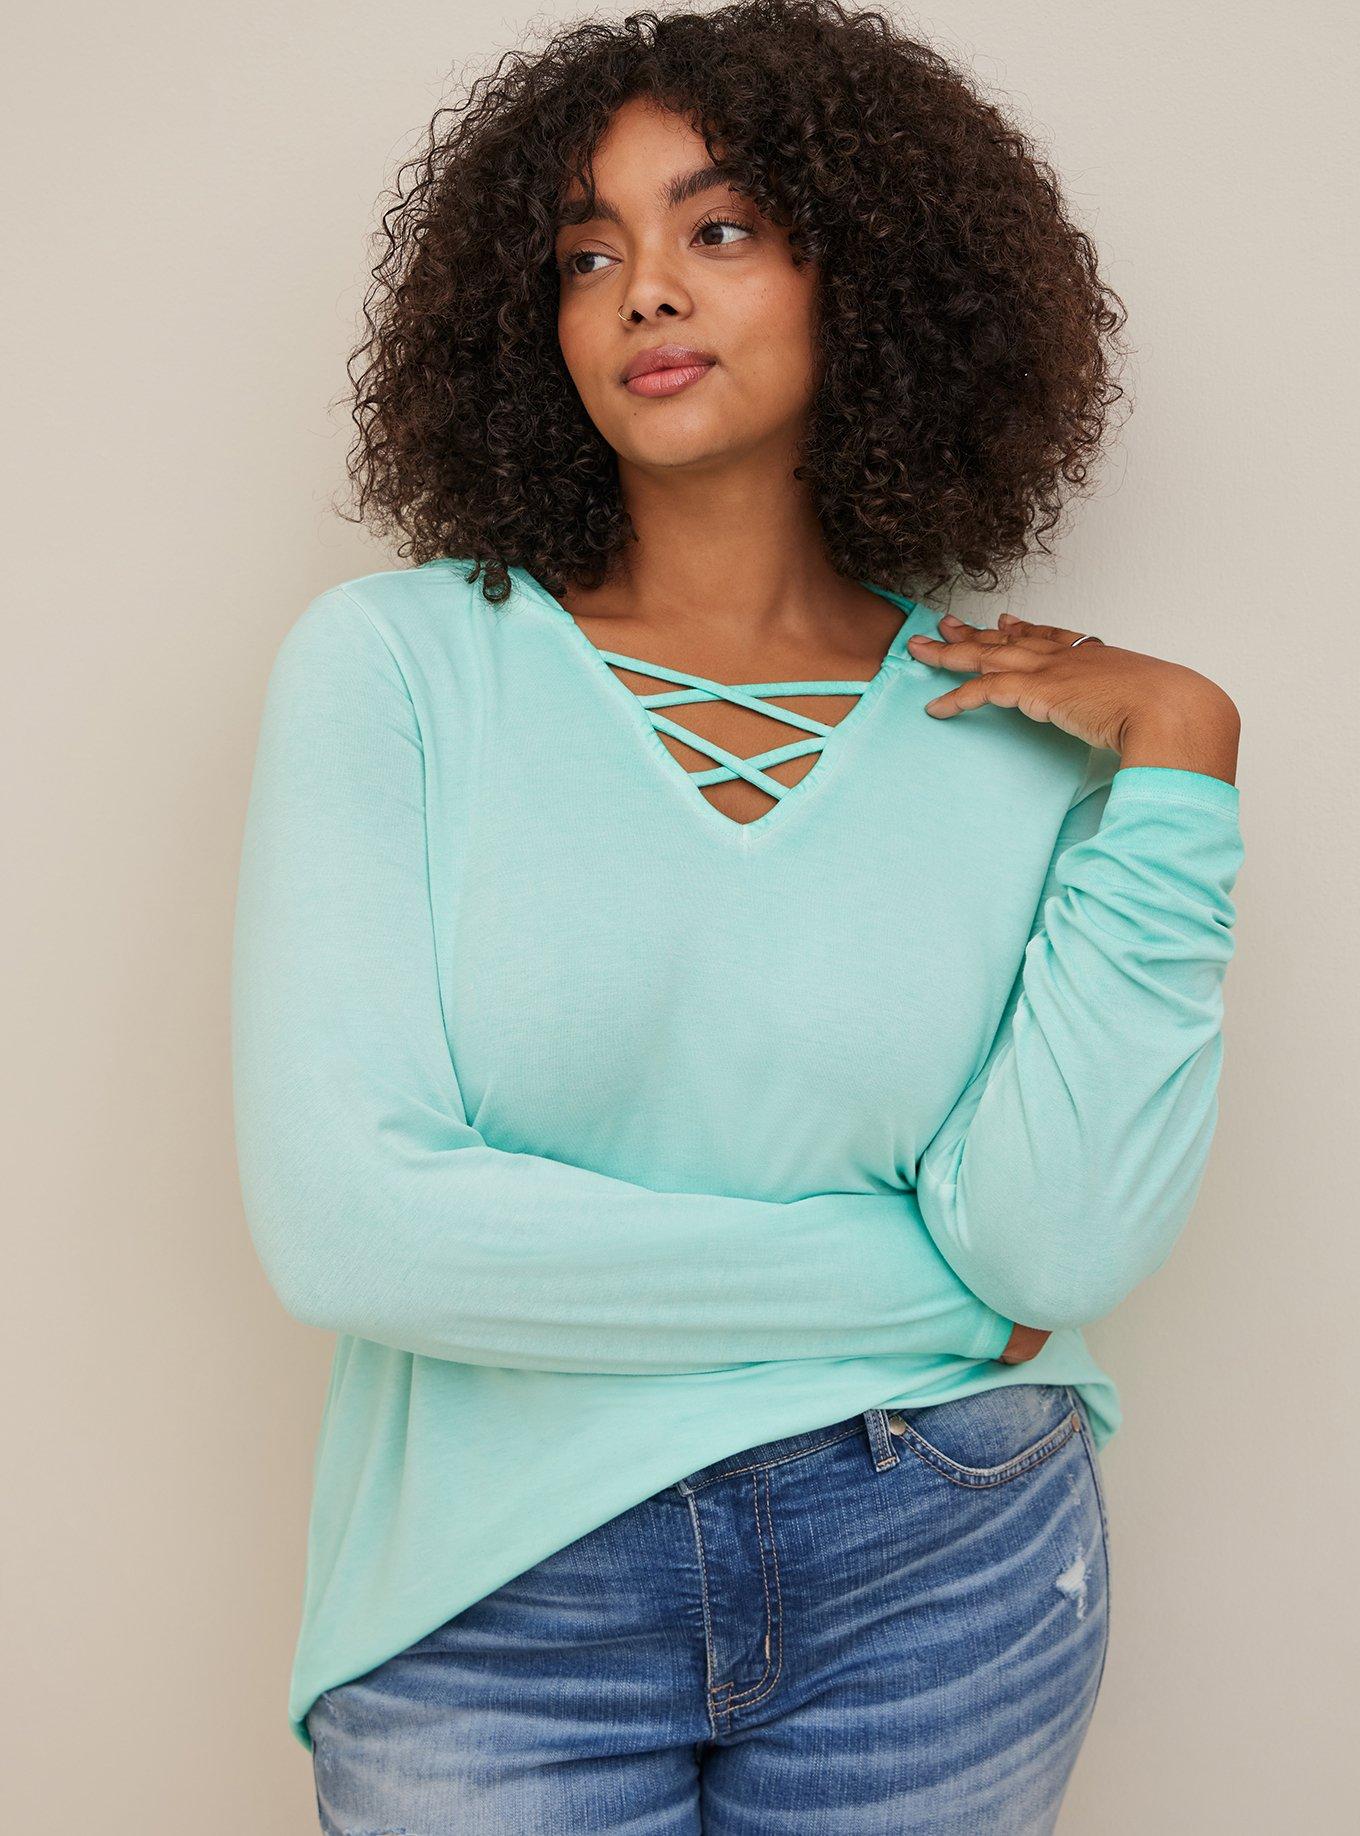 Body Hugging Cute Crop Top With Colorful Turquoise Design -  Canada